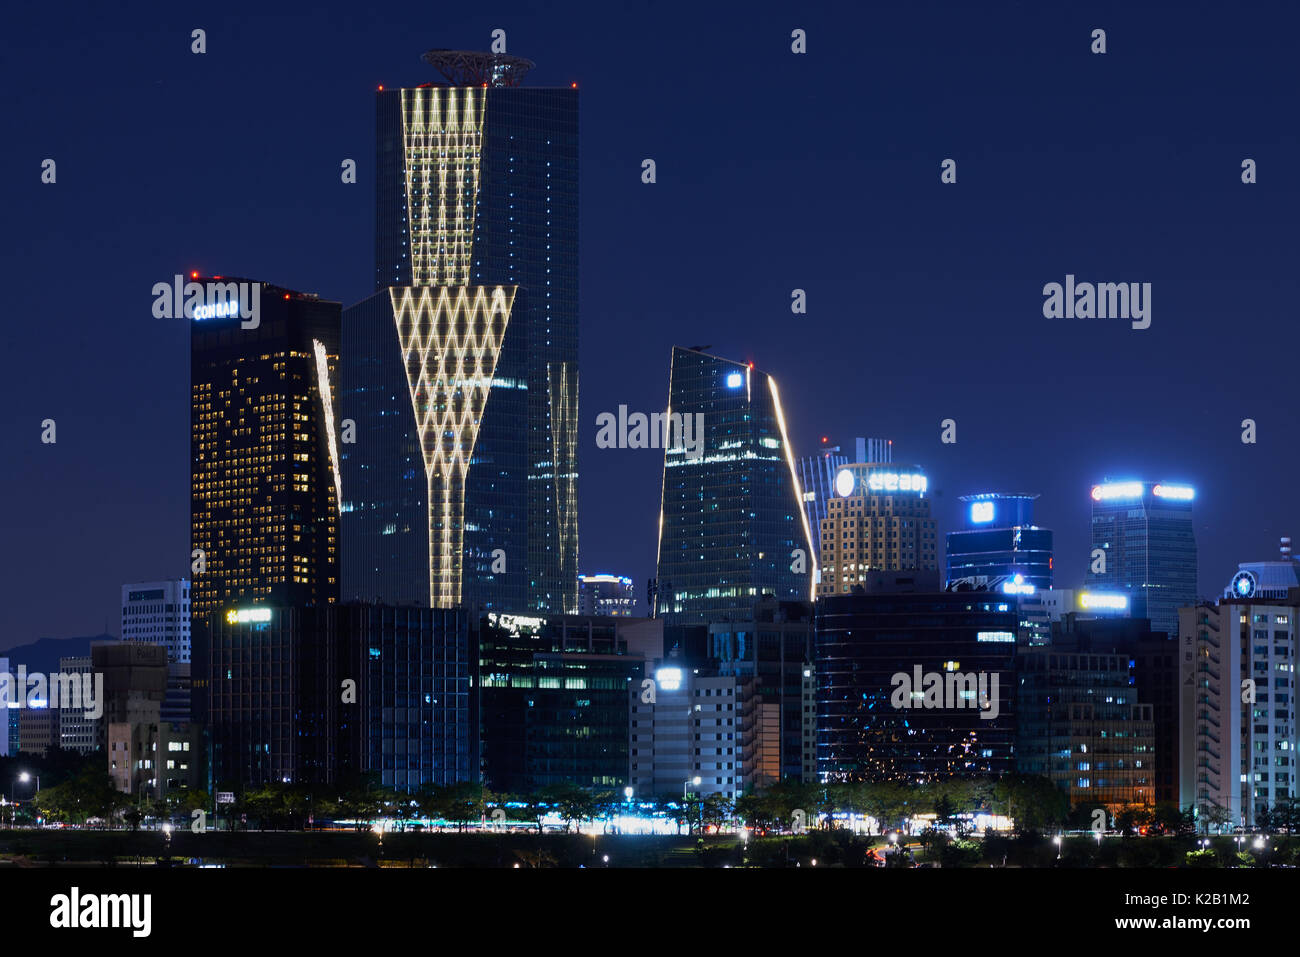 Seoul, Republic of Korea - 27 September 2015: View on Yeouido island at night. It is main district for banking and finance in Seoul. Stock Photo